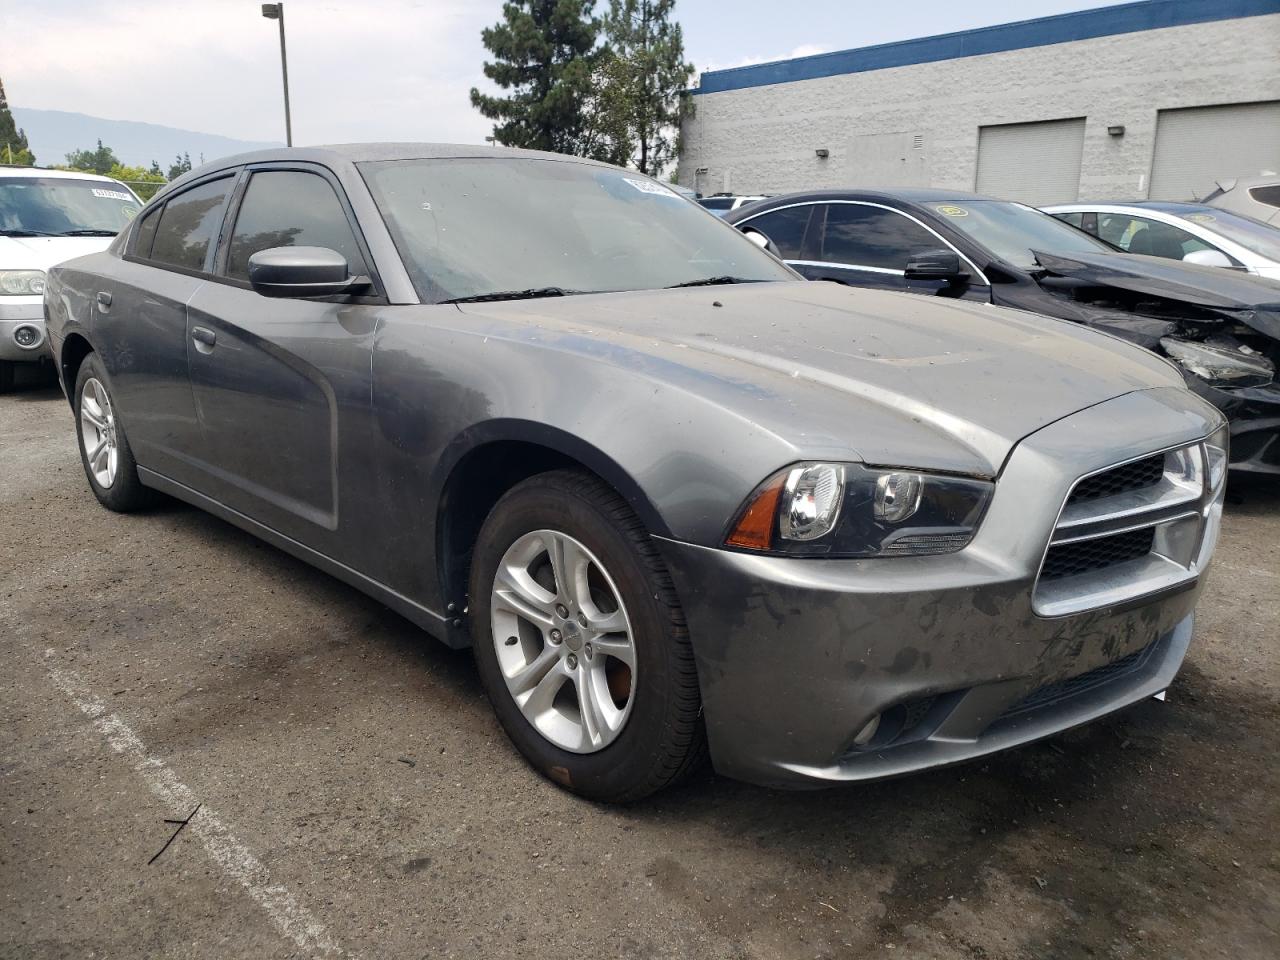 2011 Dodge Charger VIN: 2B3CL3CG2BH582424 Lot: 62574044